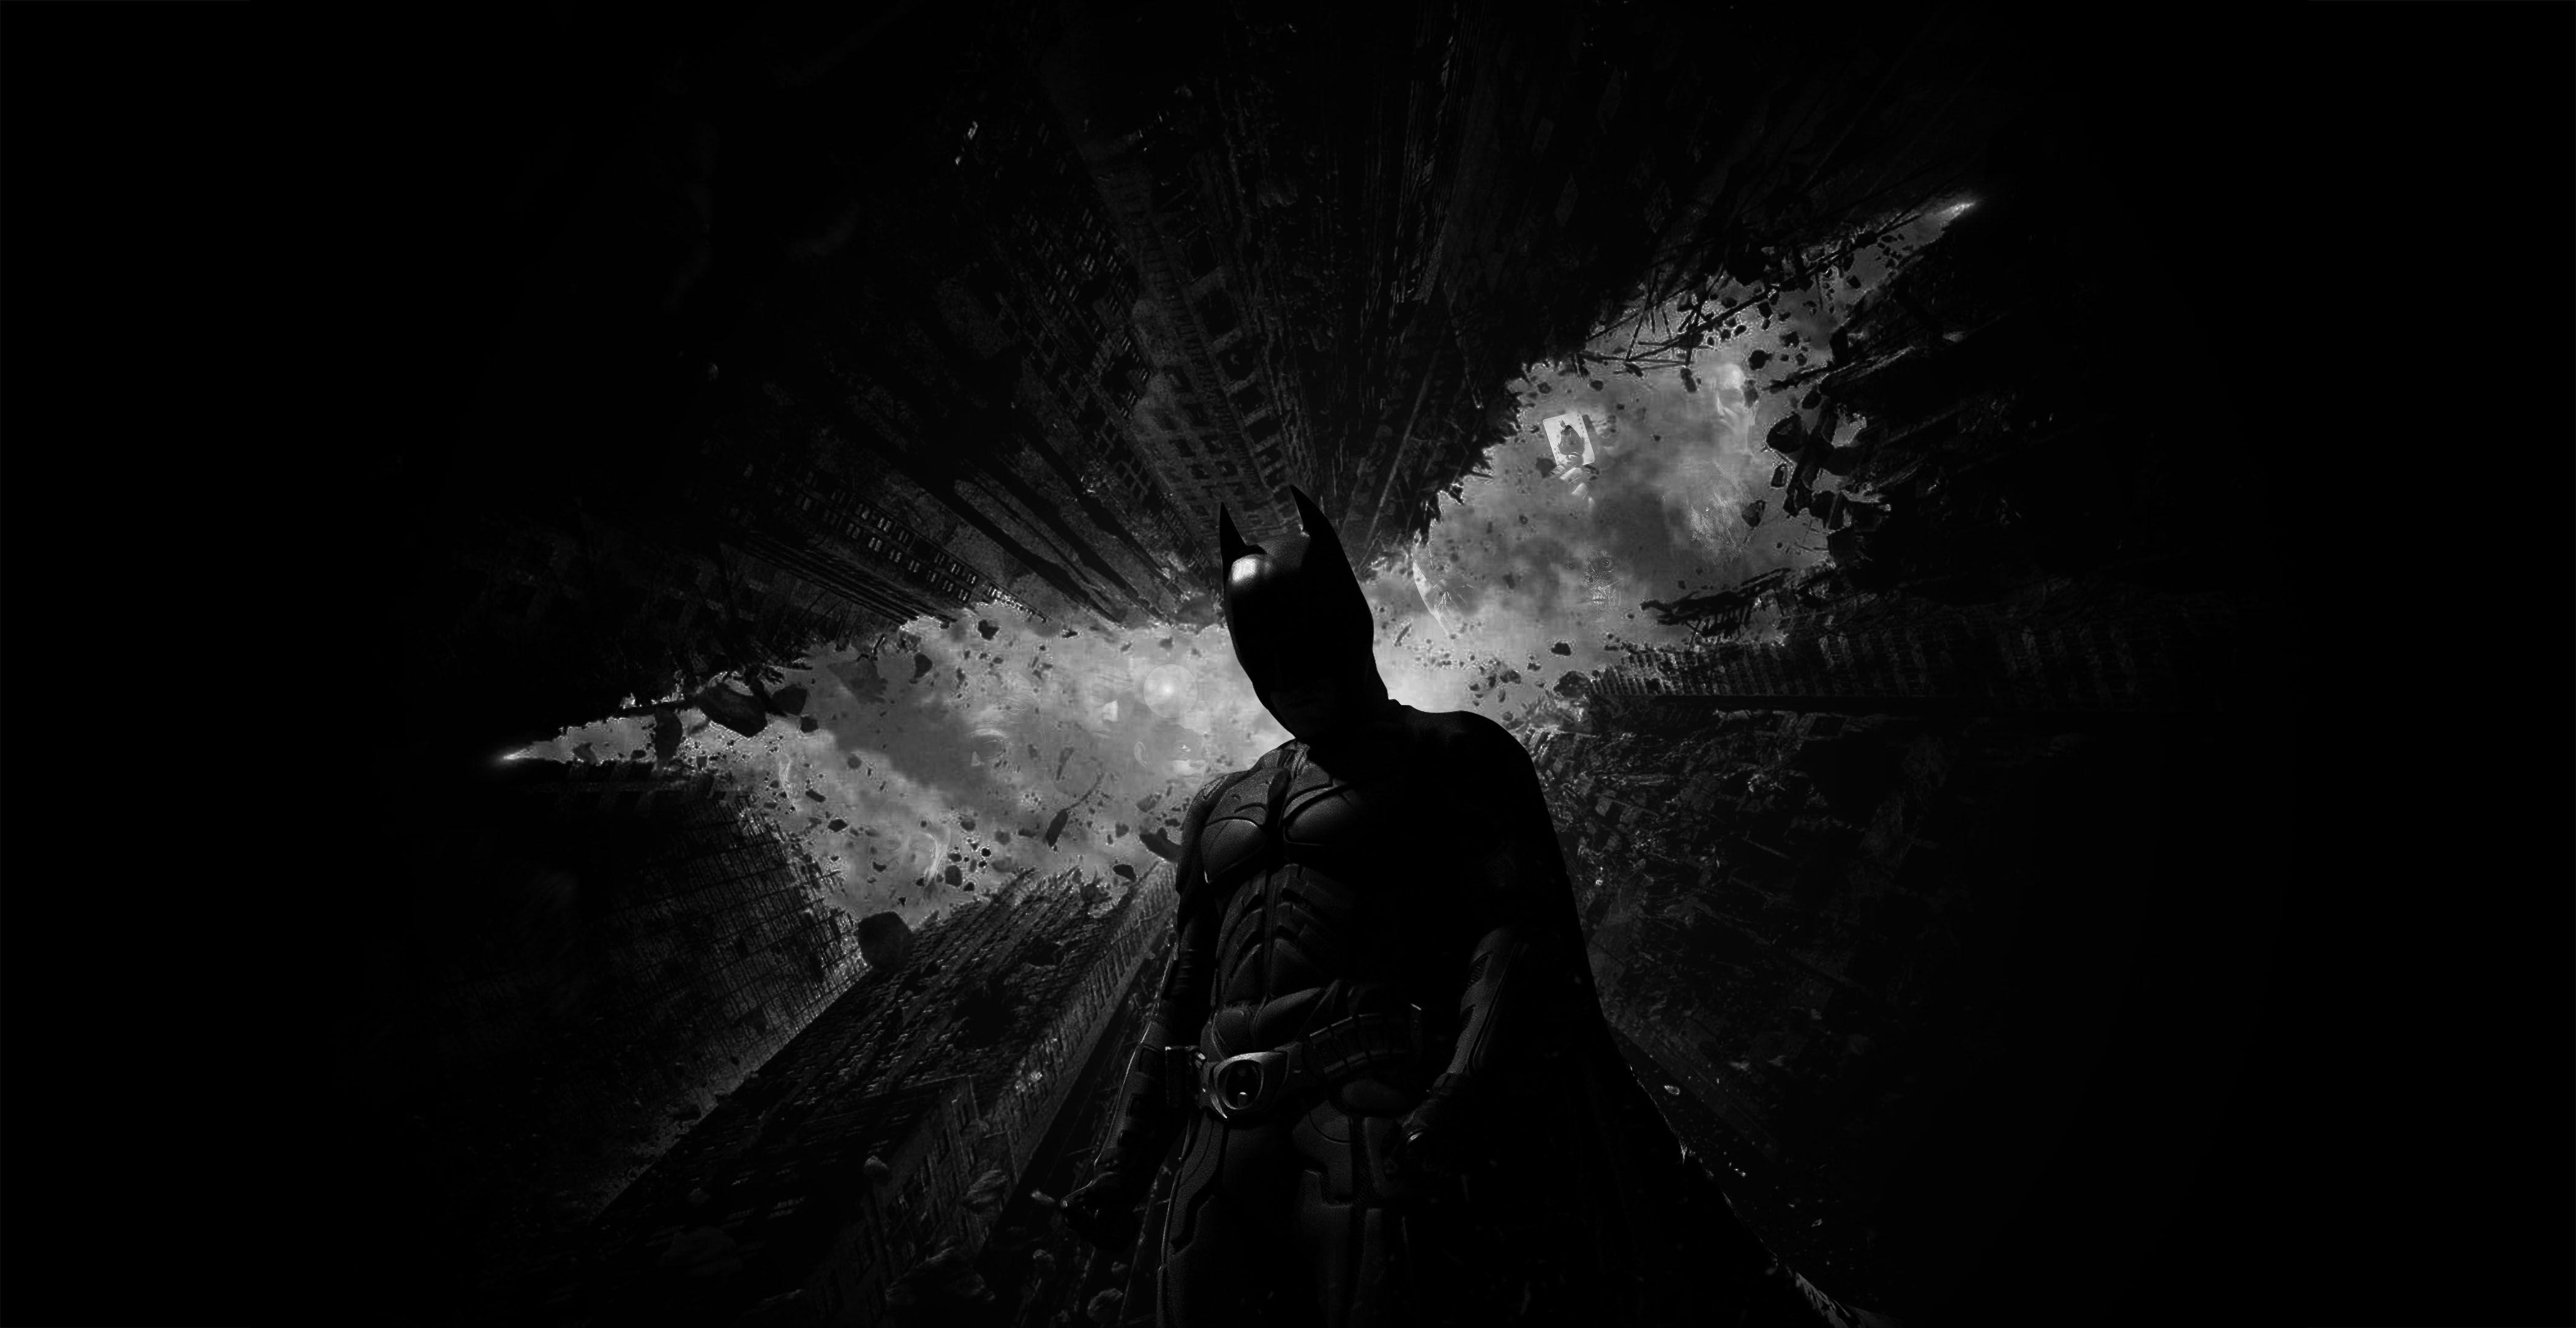 The Dark Knight for android instal